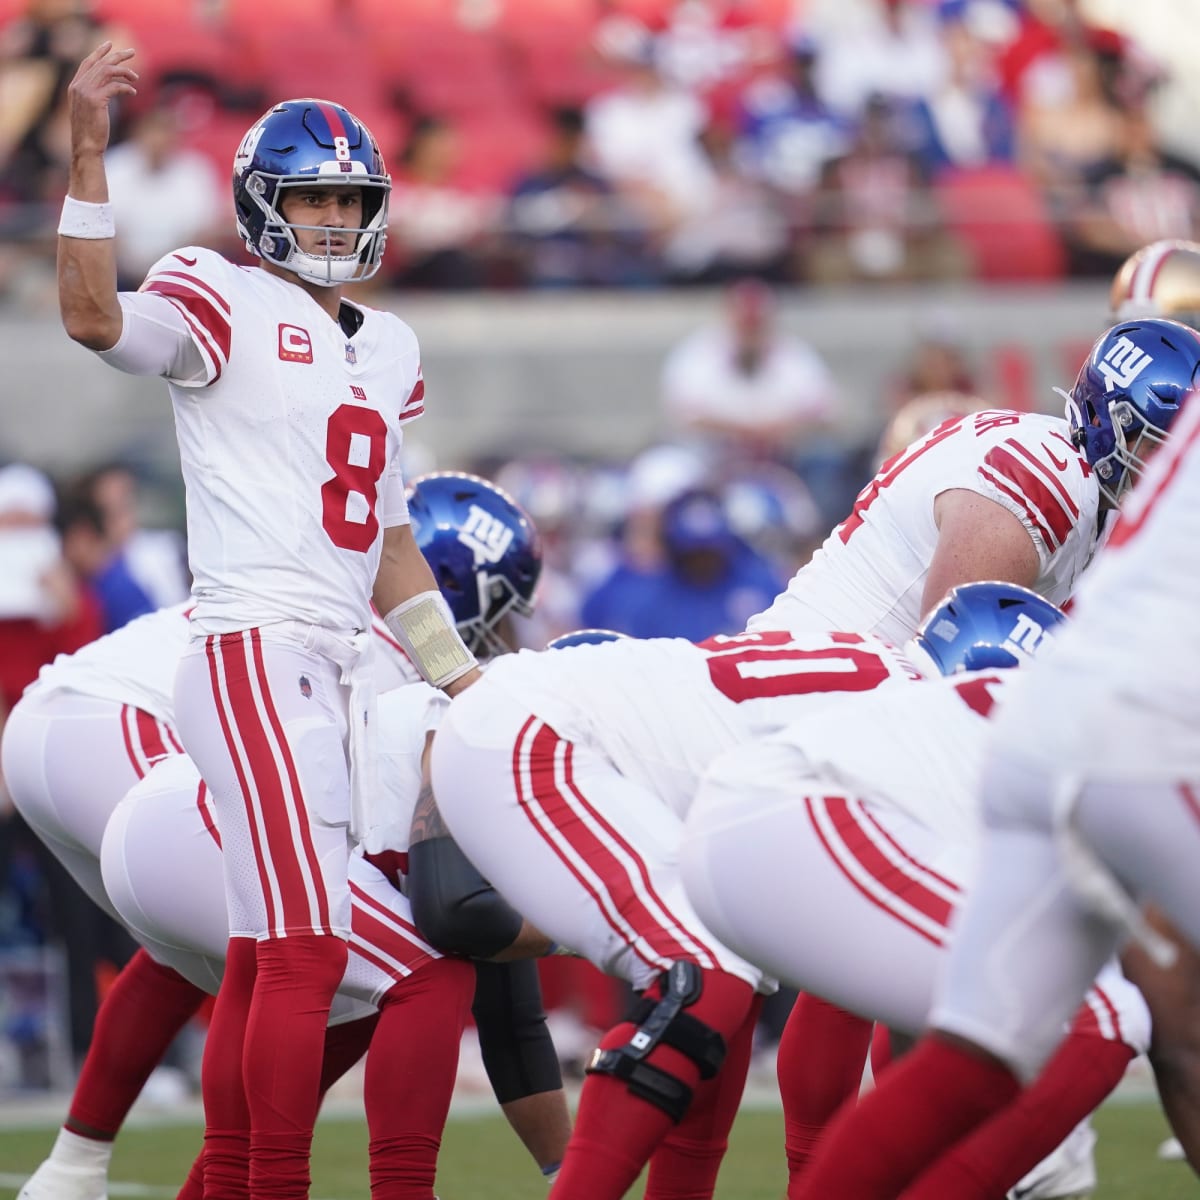 Five things to watch at New York Giants: Room to improve on offense